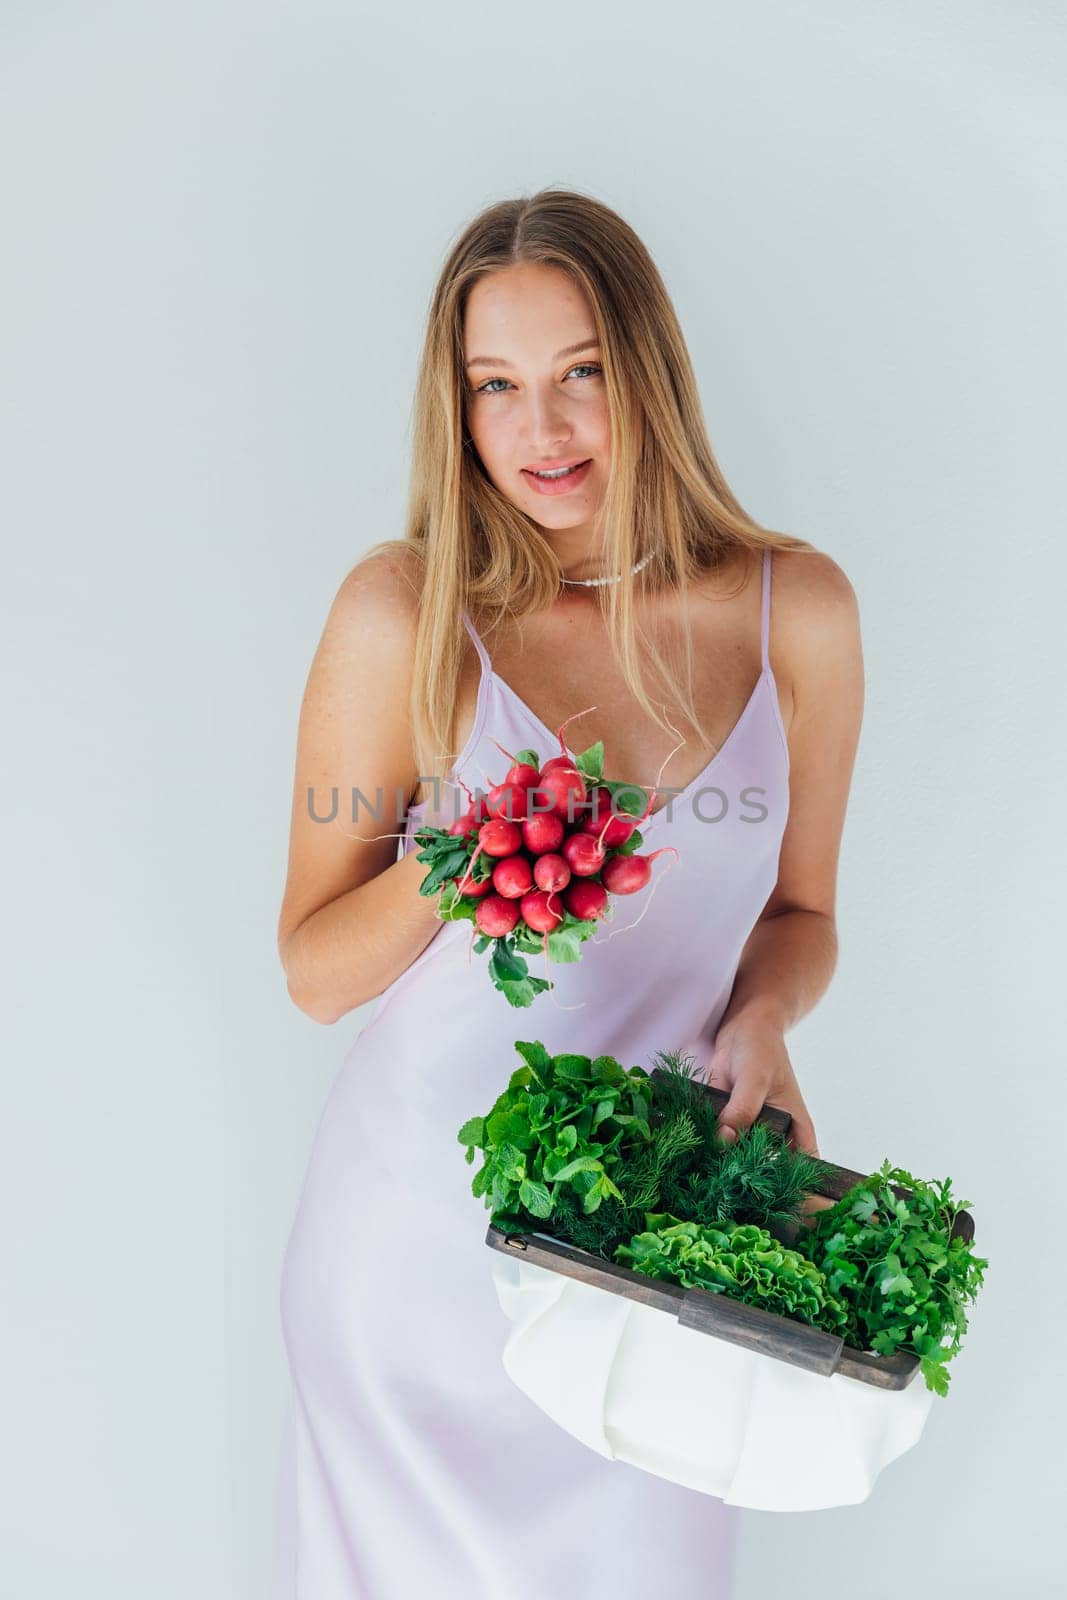 Fashionable woman holding a clutch with greens of vegetables in her hands